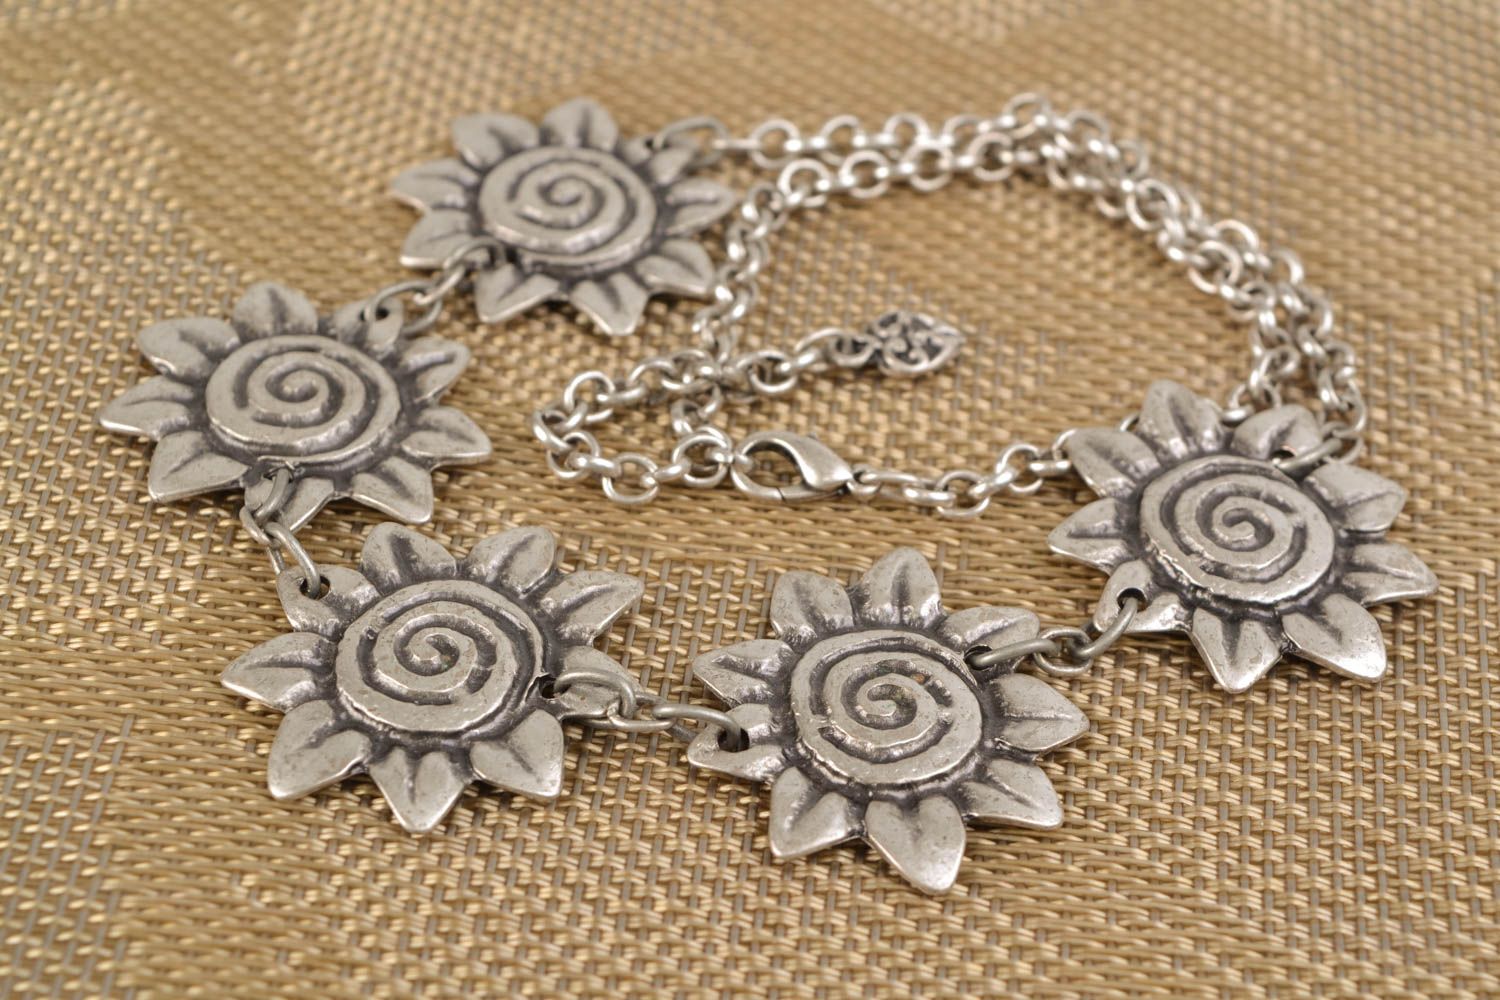 Metal necklace made using permanent mold casting technique with sunflowers photo 1